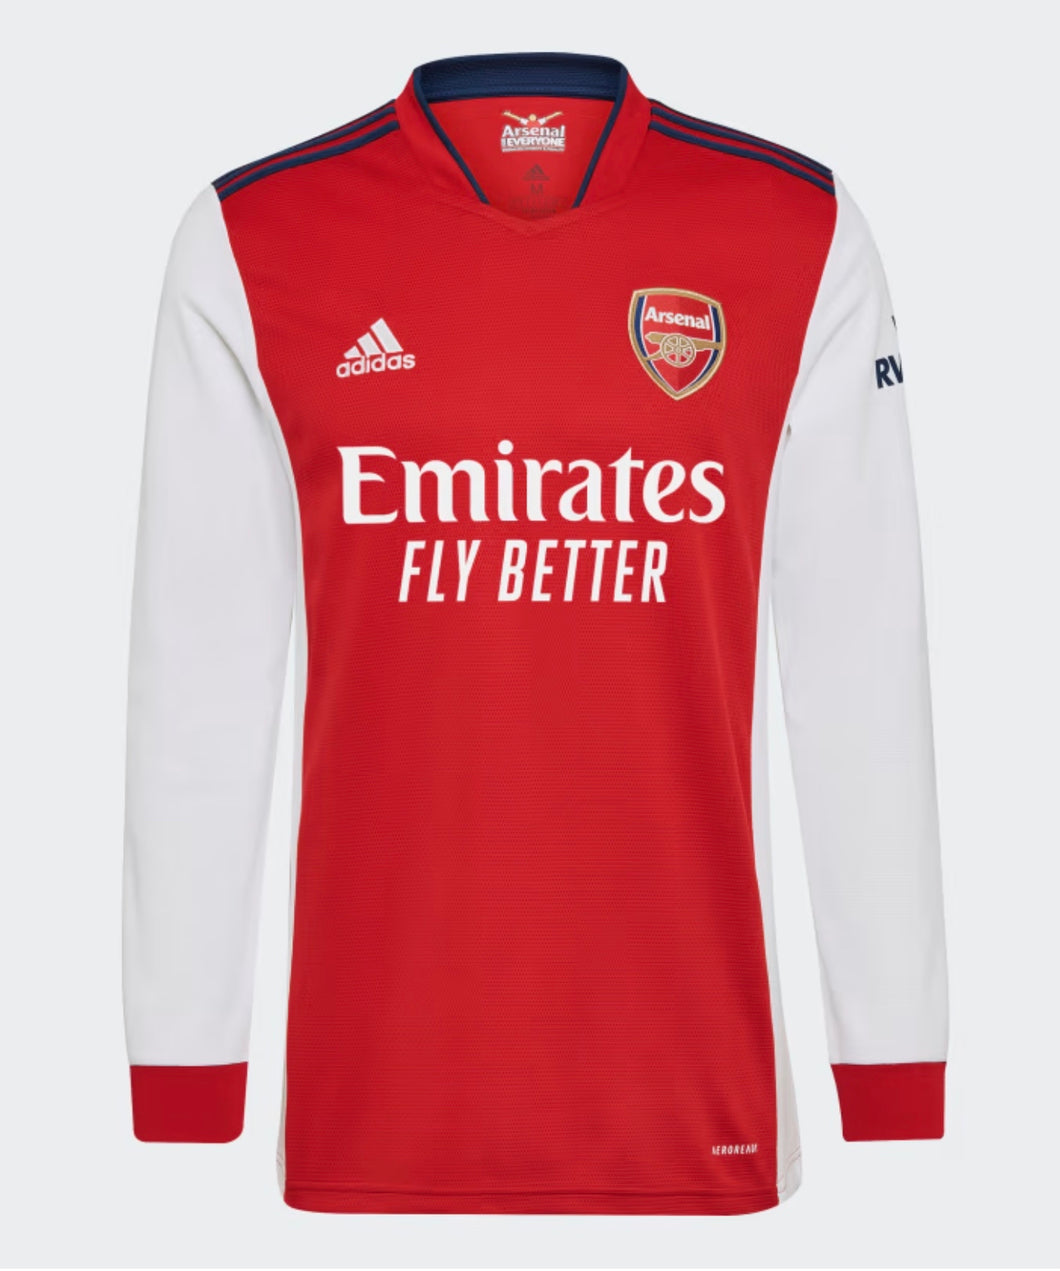 adidas Arsenal FC Home Jersey Longsleeve 21/22 GQ3247 RED/NAVY/WHITE